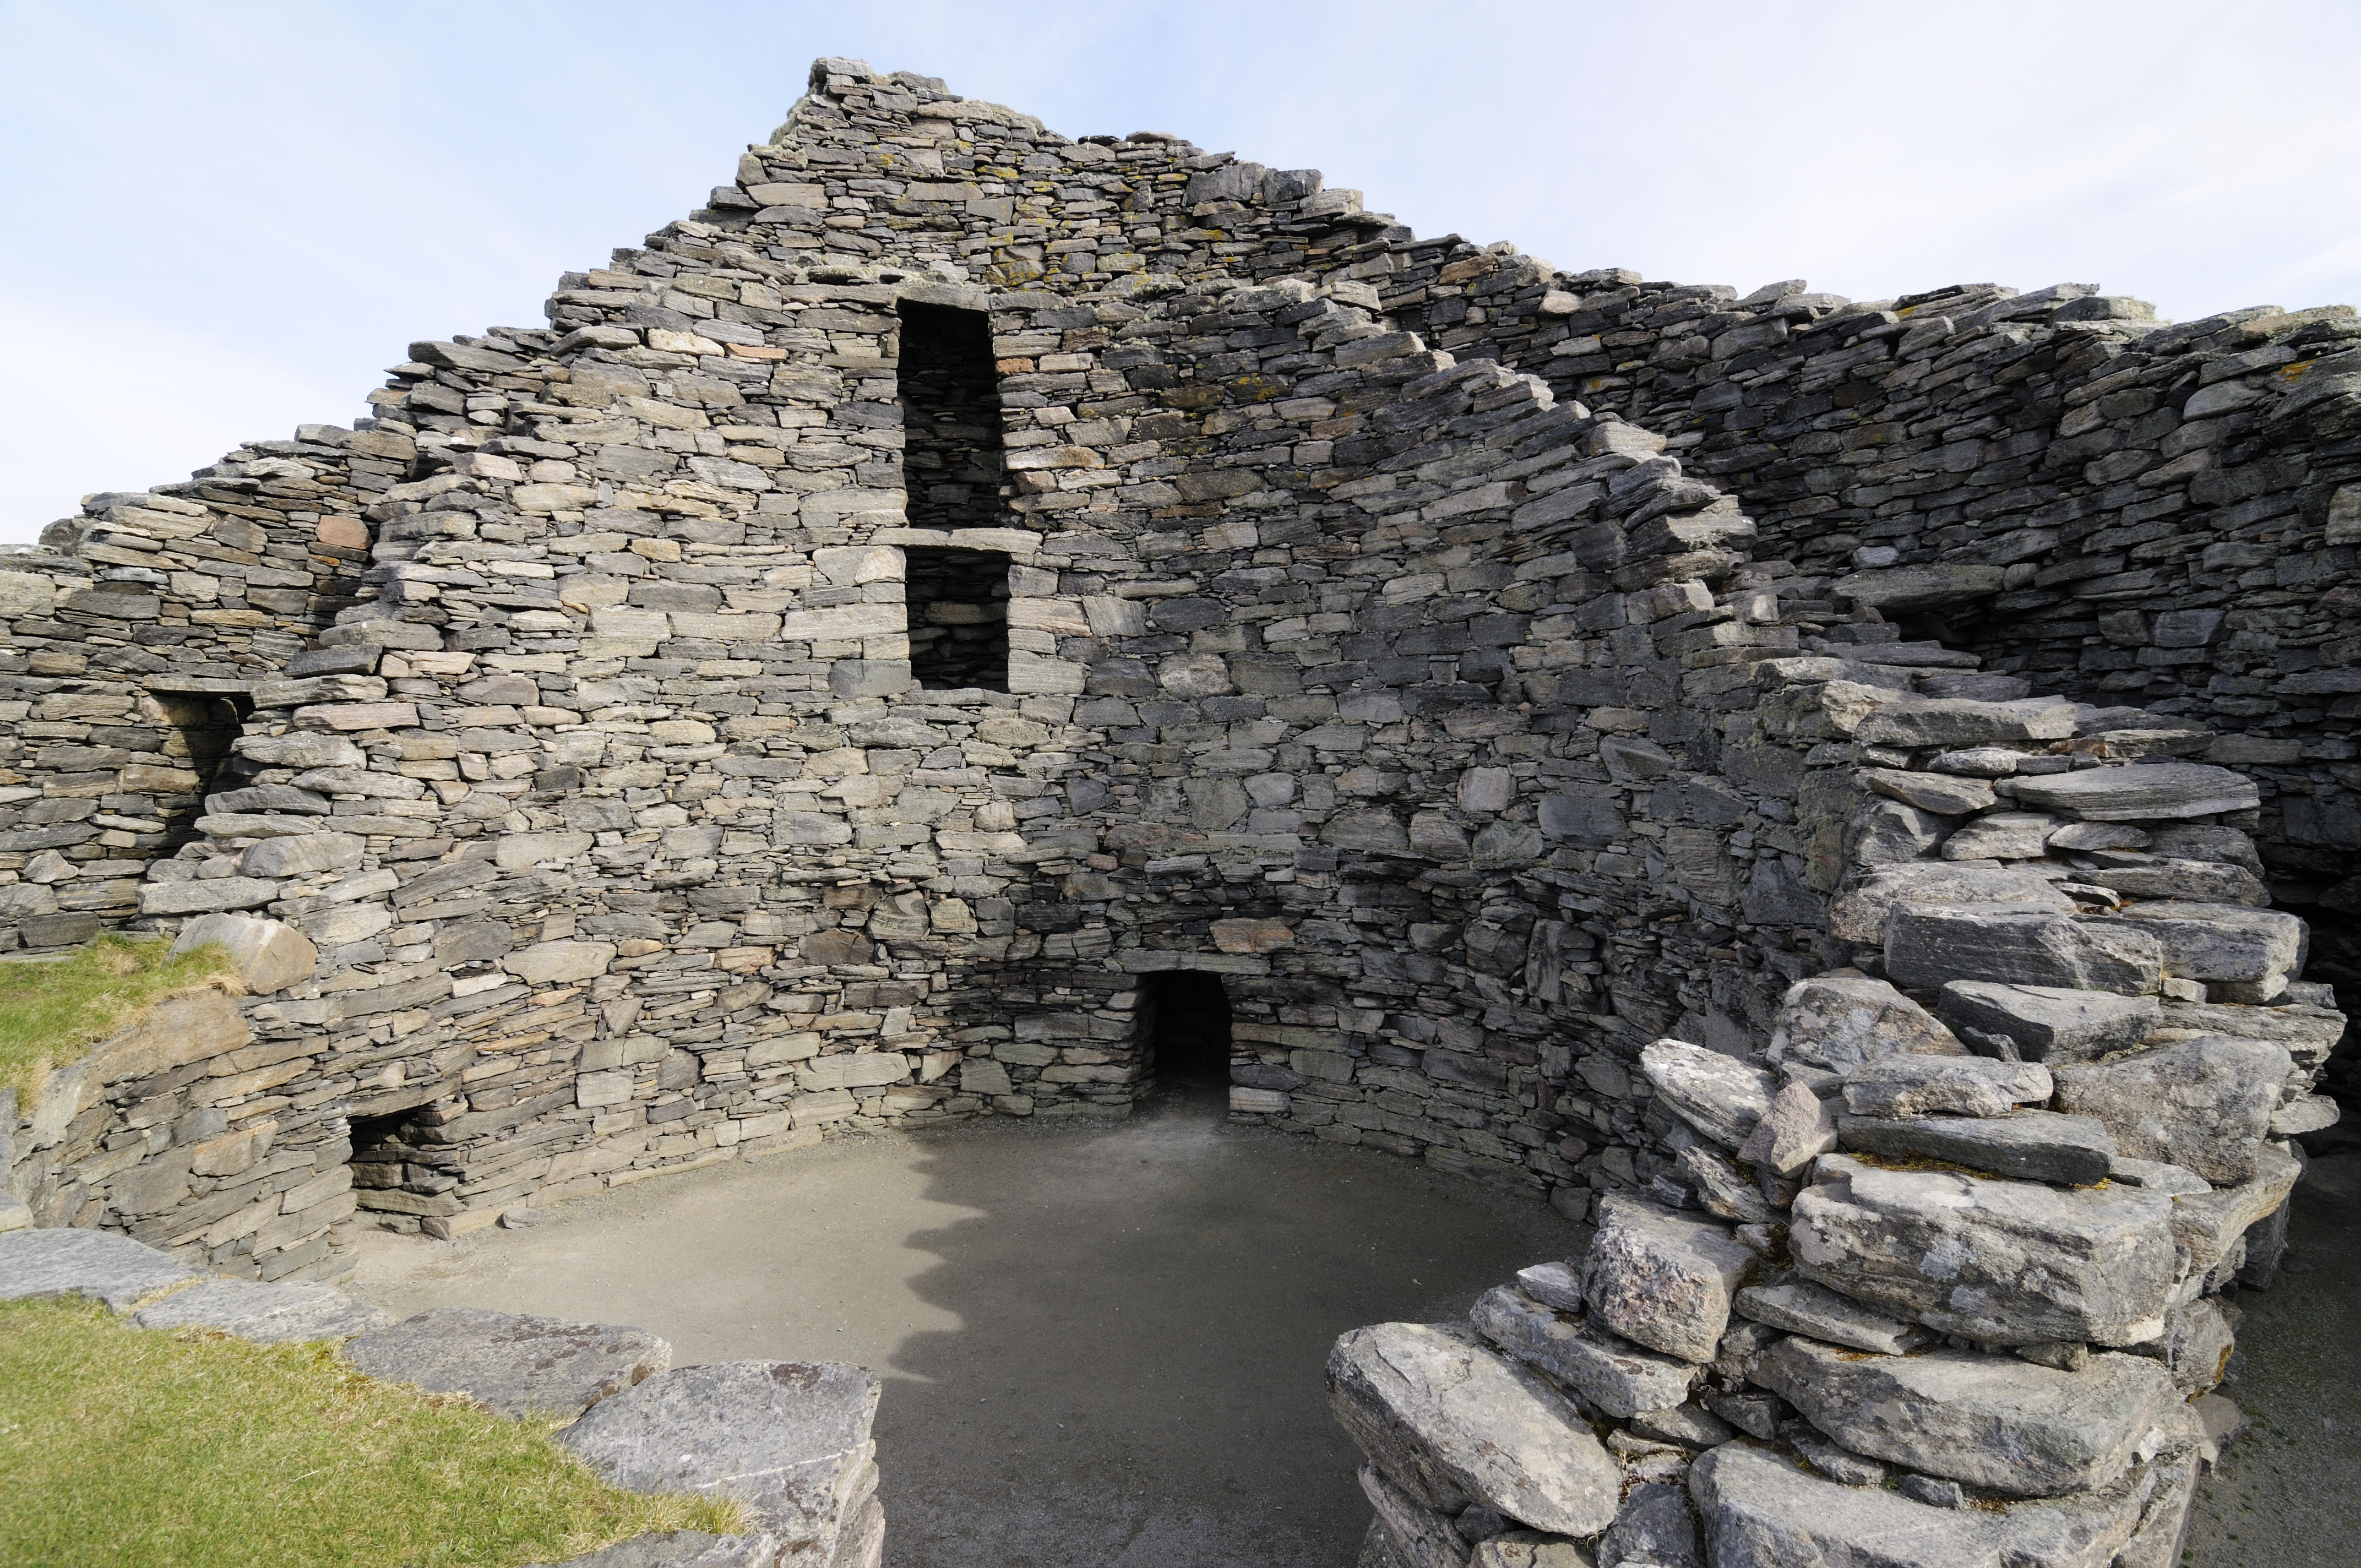 Photograph of the interior of Dun Carloway, a broch on Lewis, Western Isles